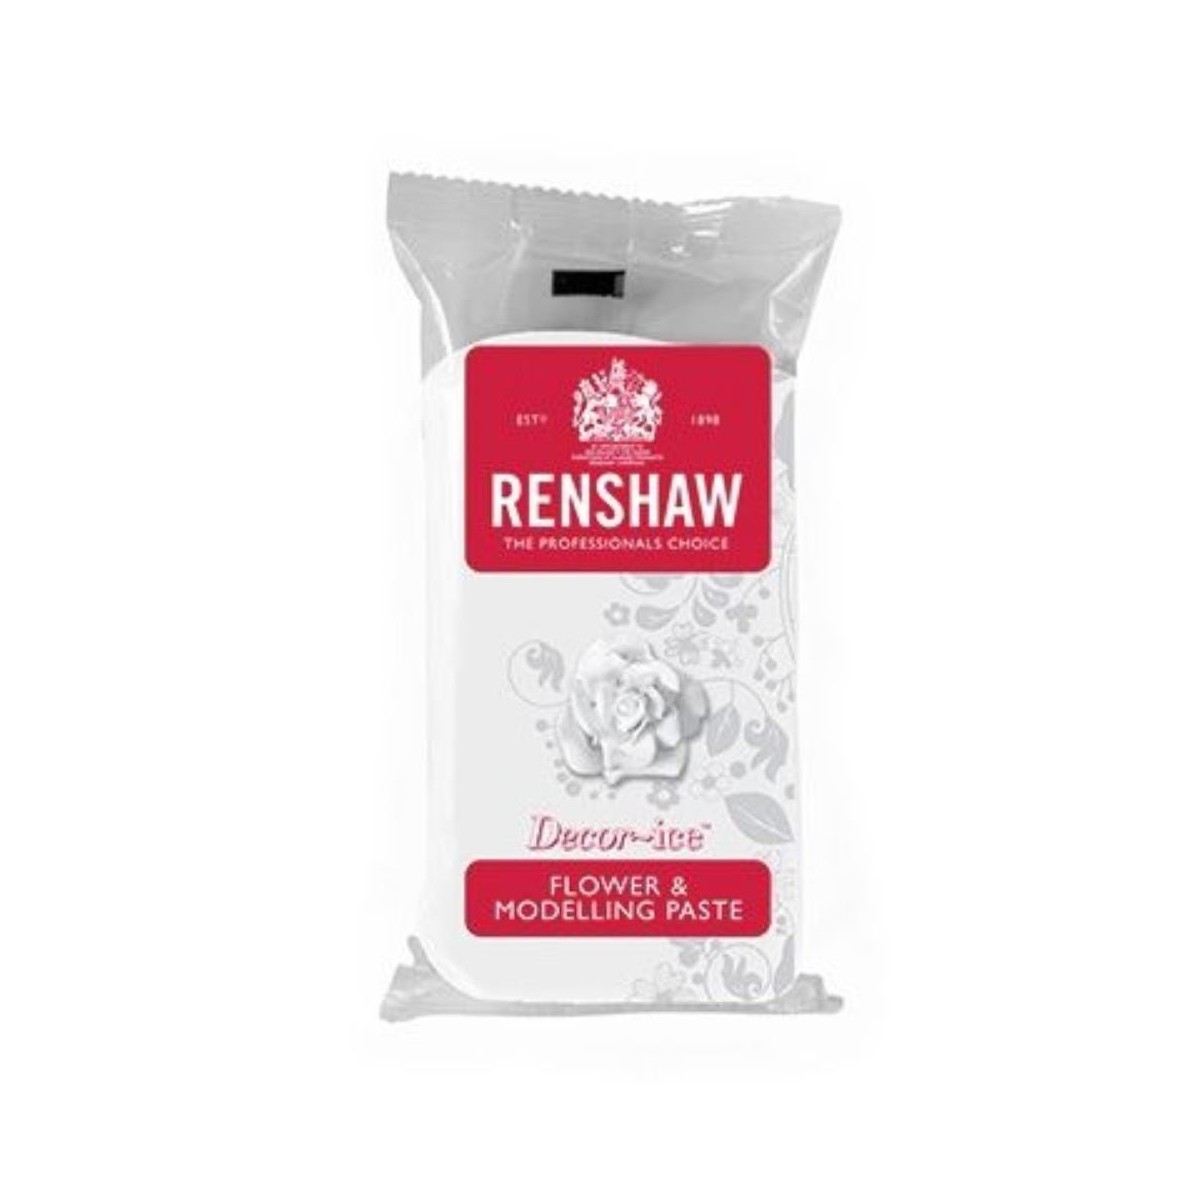 RENSHAW PATE A SUCRE SPECIAL MODELAGE BLANC250GR